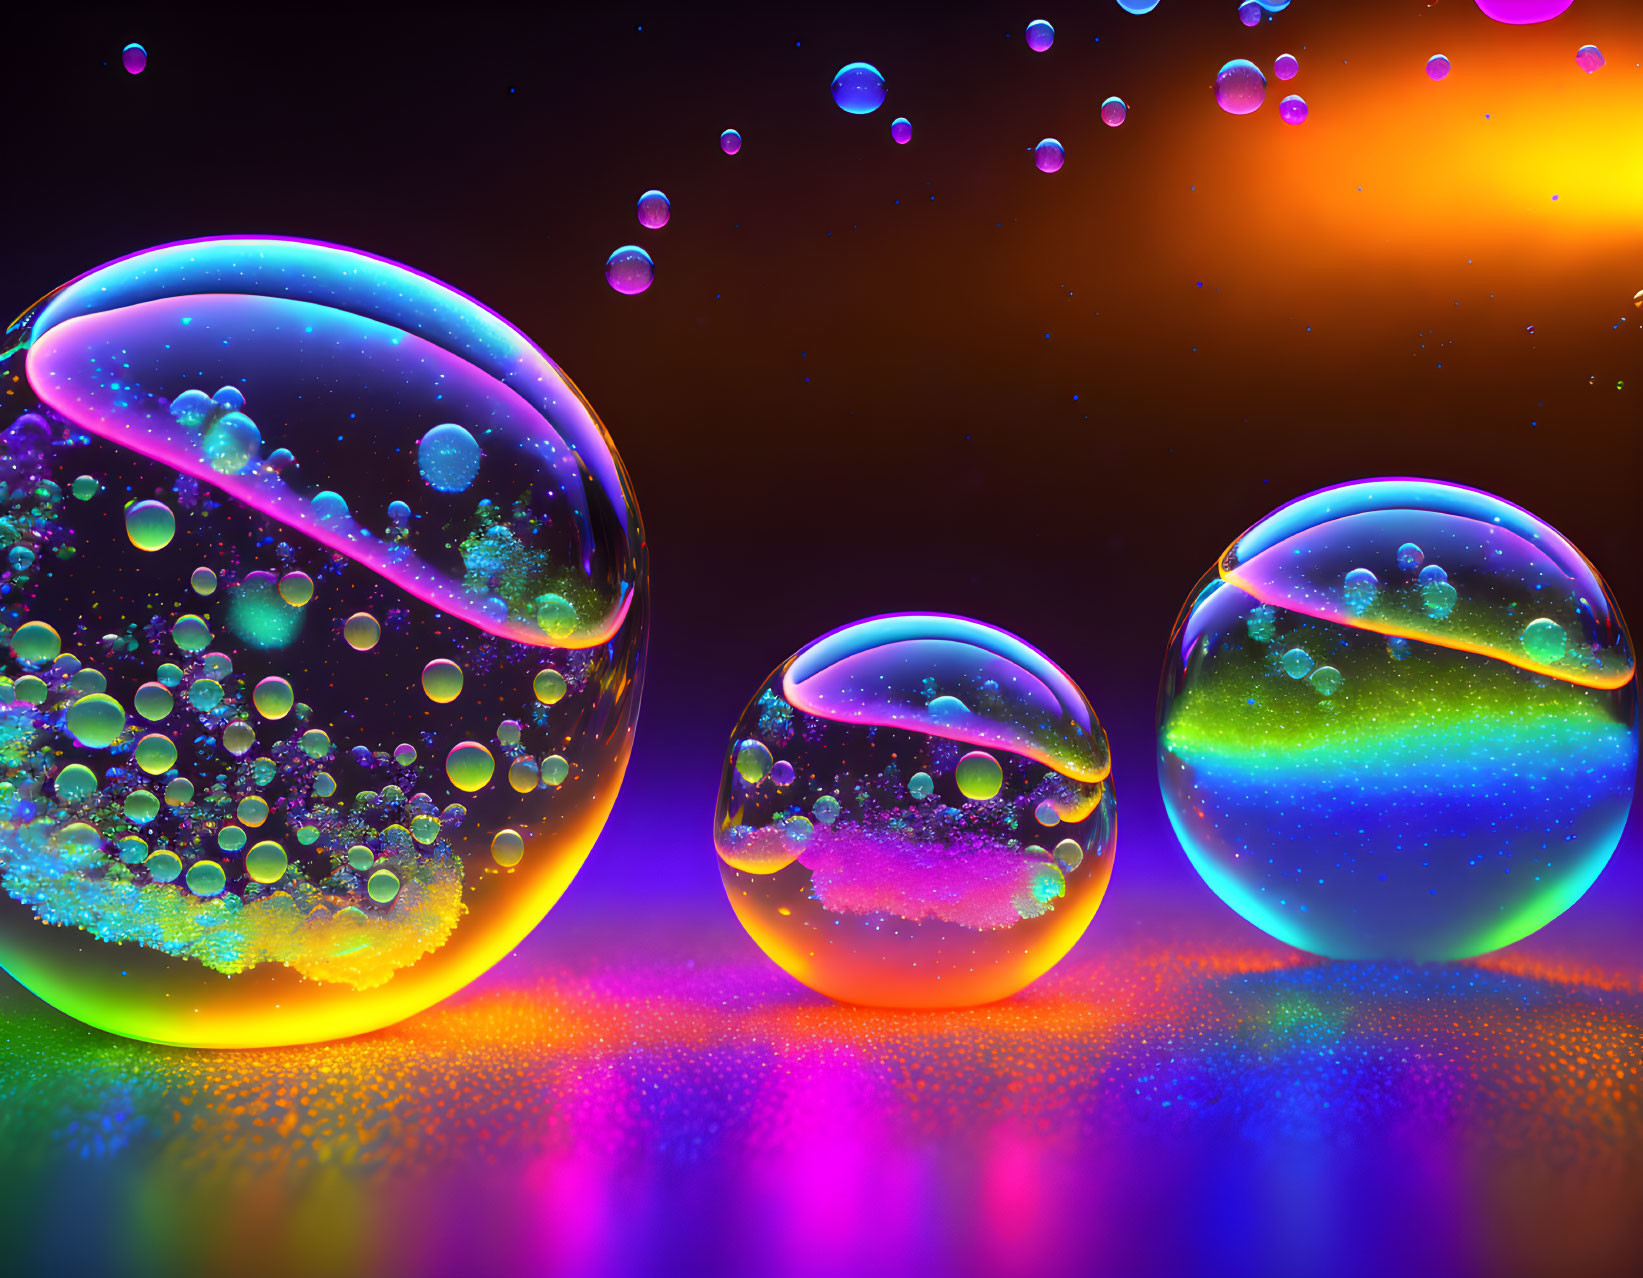 Vibrant orange and purple background with colorful translucent bubbles